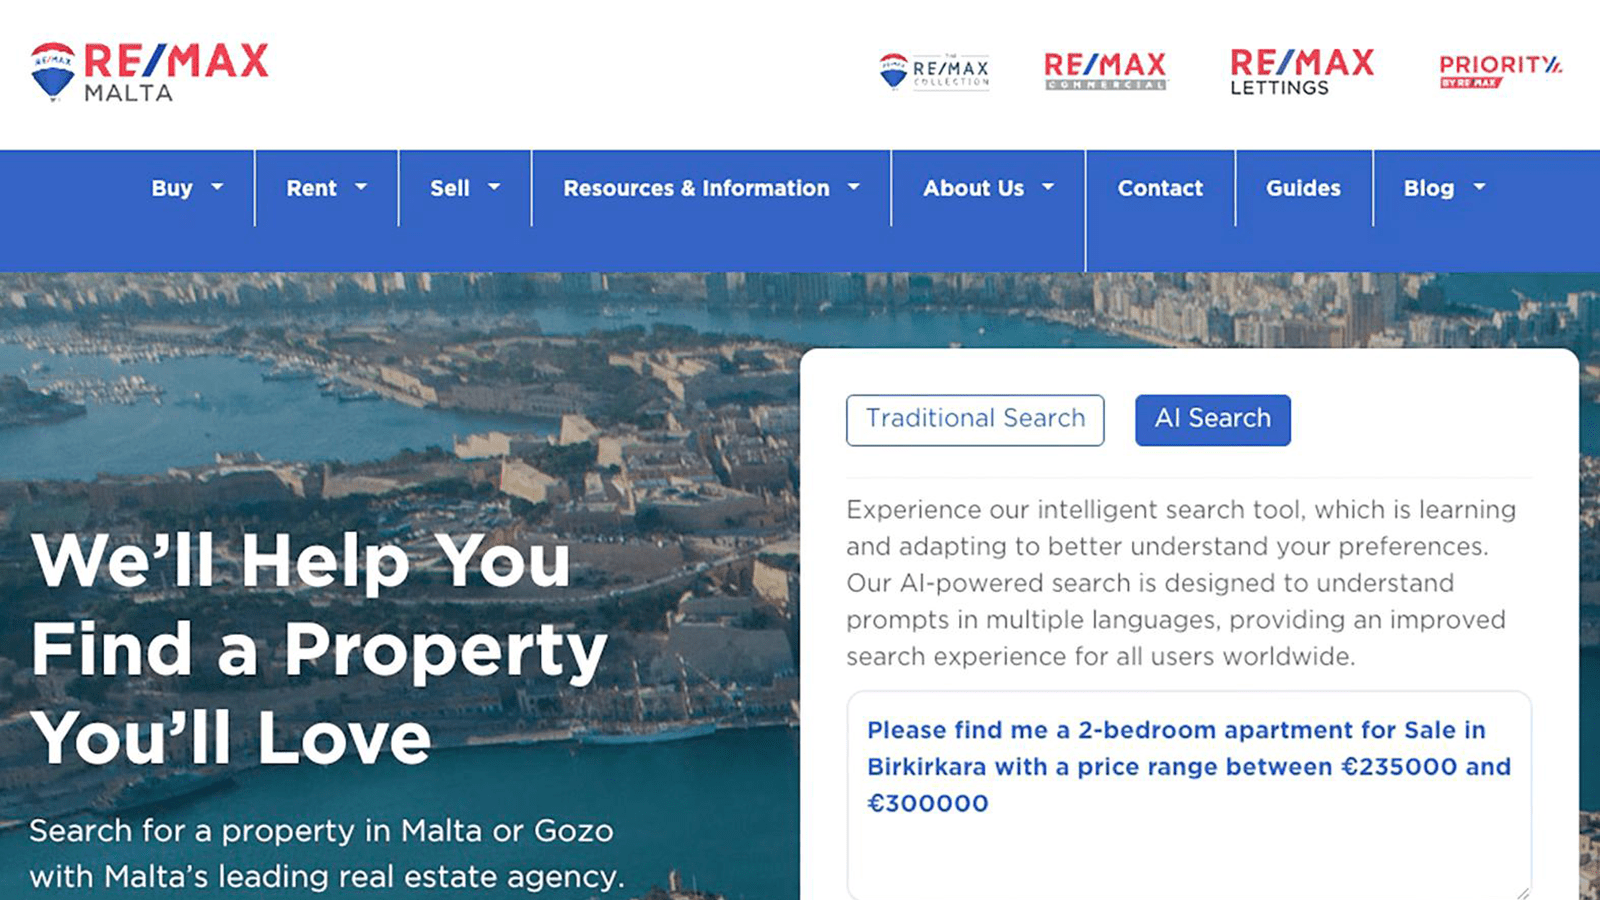 REMAX Malta Introduces AI Search Functionality